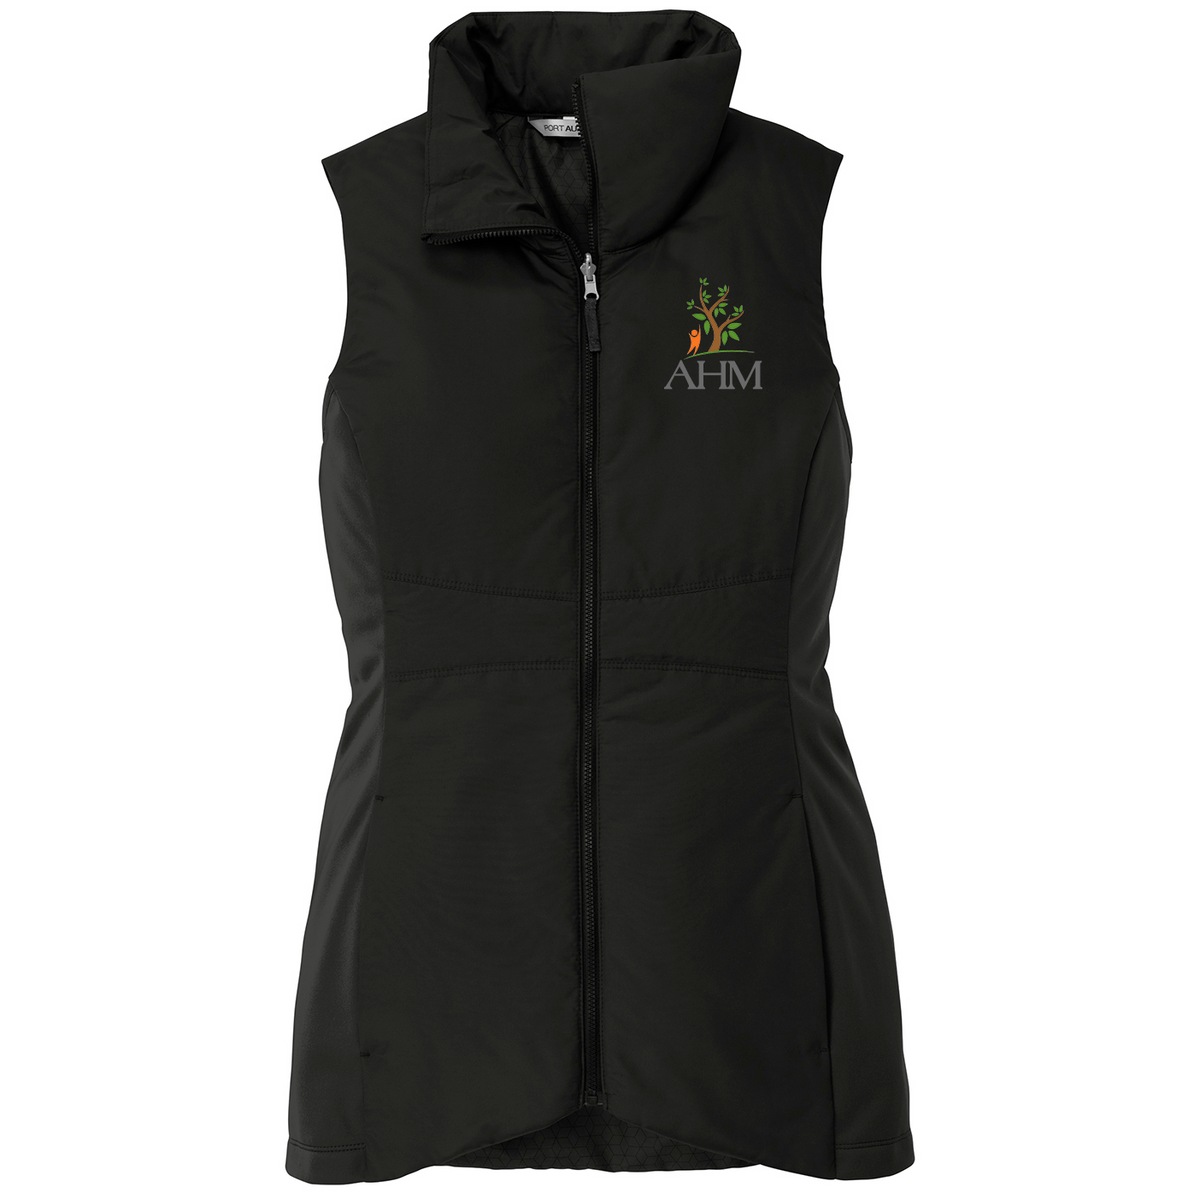 AHM Youth & Family Services Vest